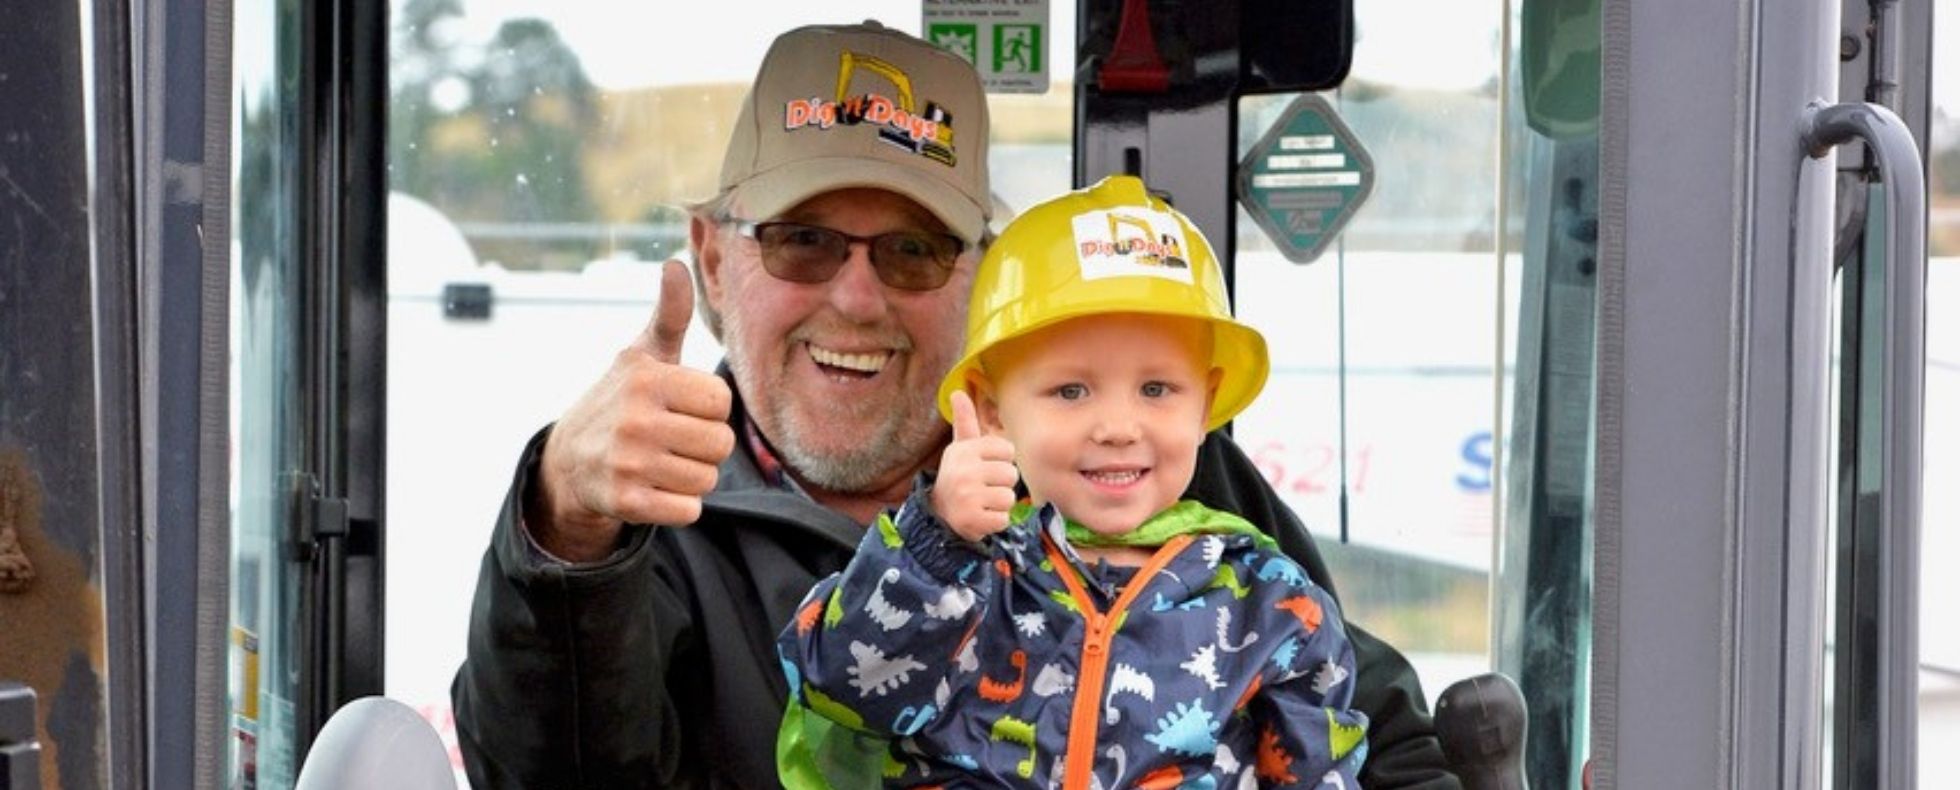 Dig It Days and Build Montana Shape the Future of the Construction Industry